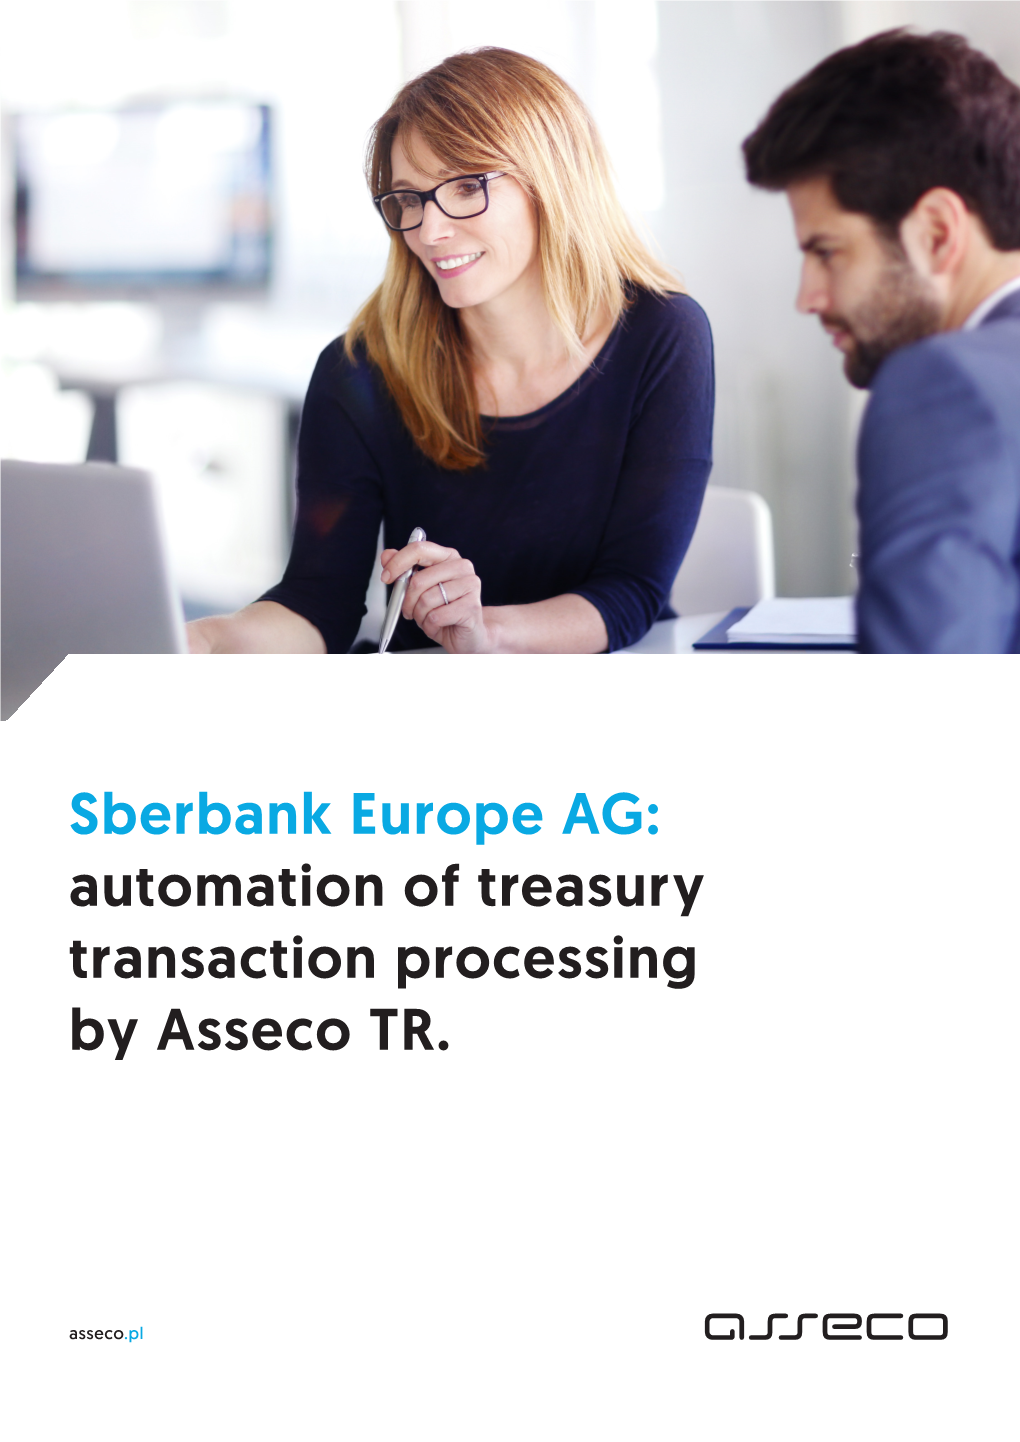 Sberbank Europe AG: Automation of Treasury Transaction Processing by Asseco TR